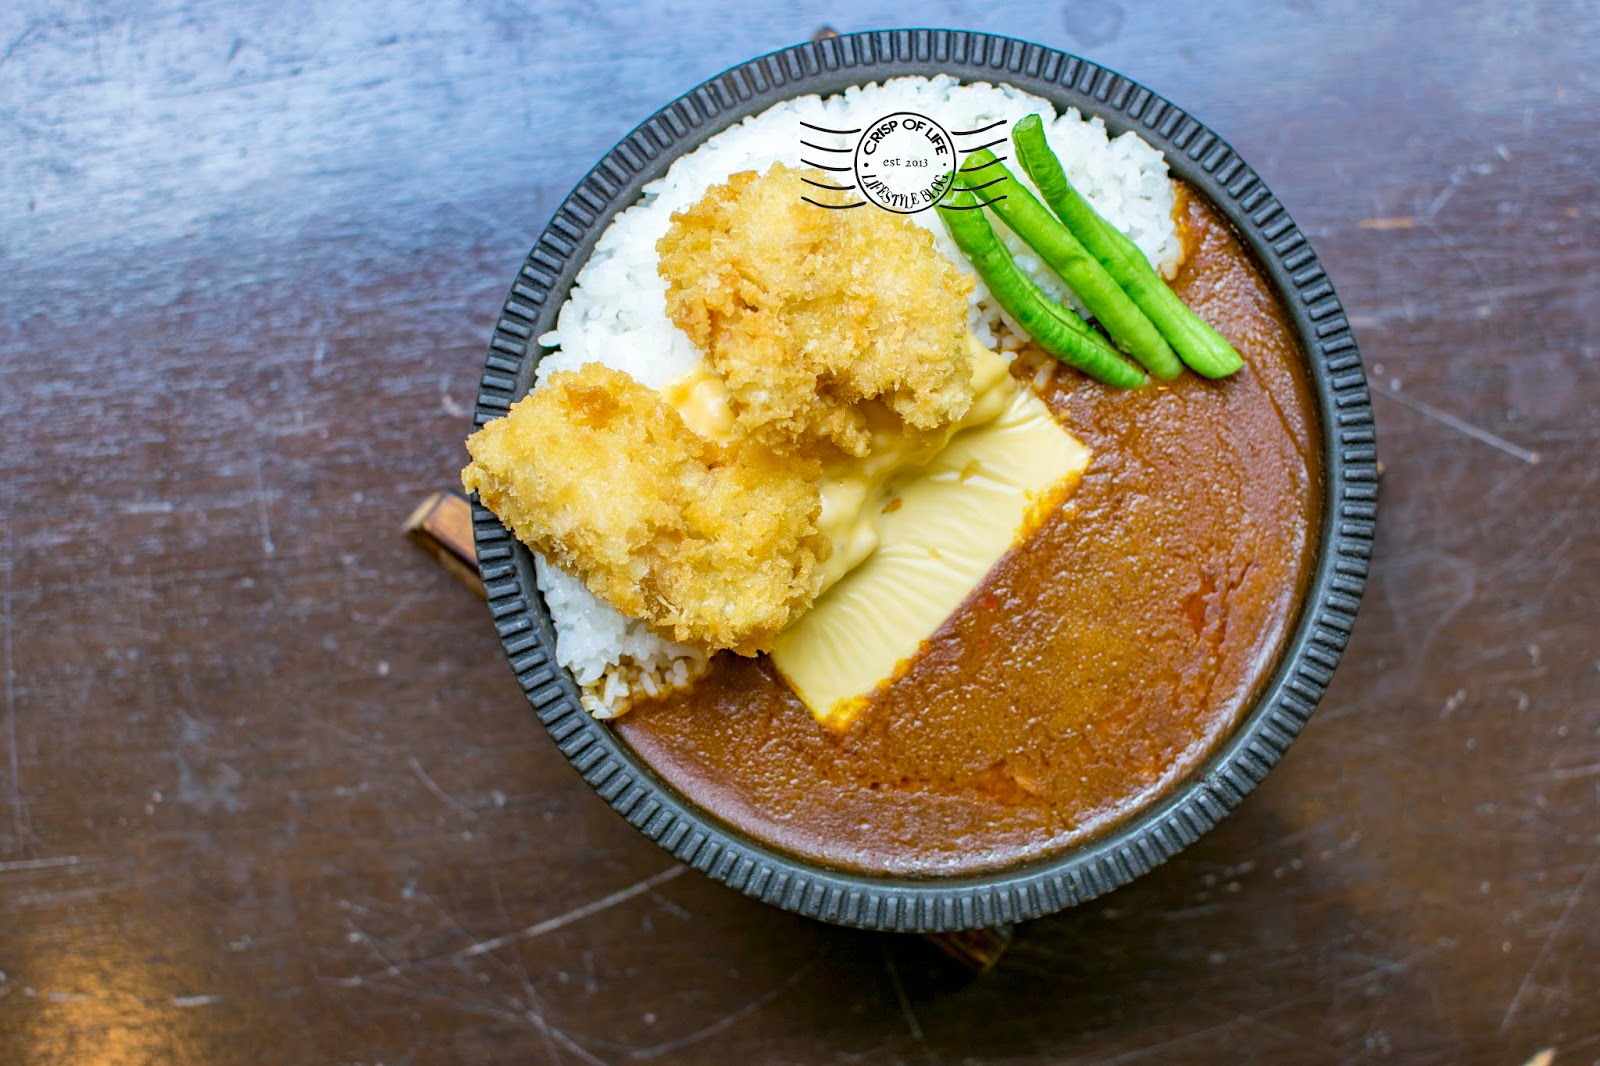 Sushi King's limited time menu with Japanese curry with a kick.